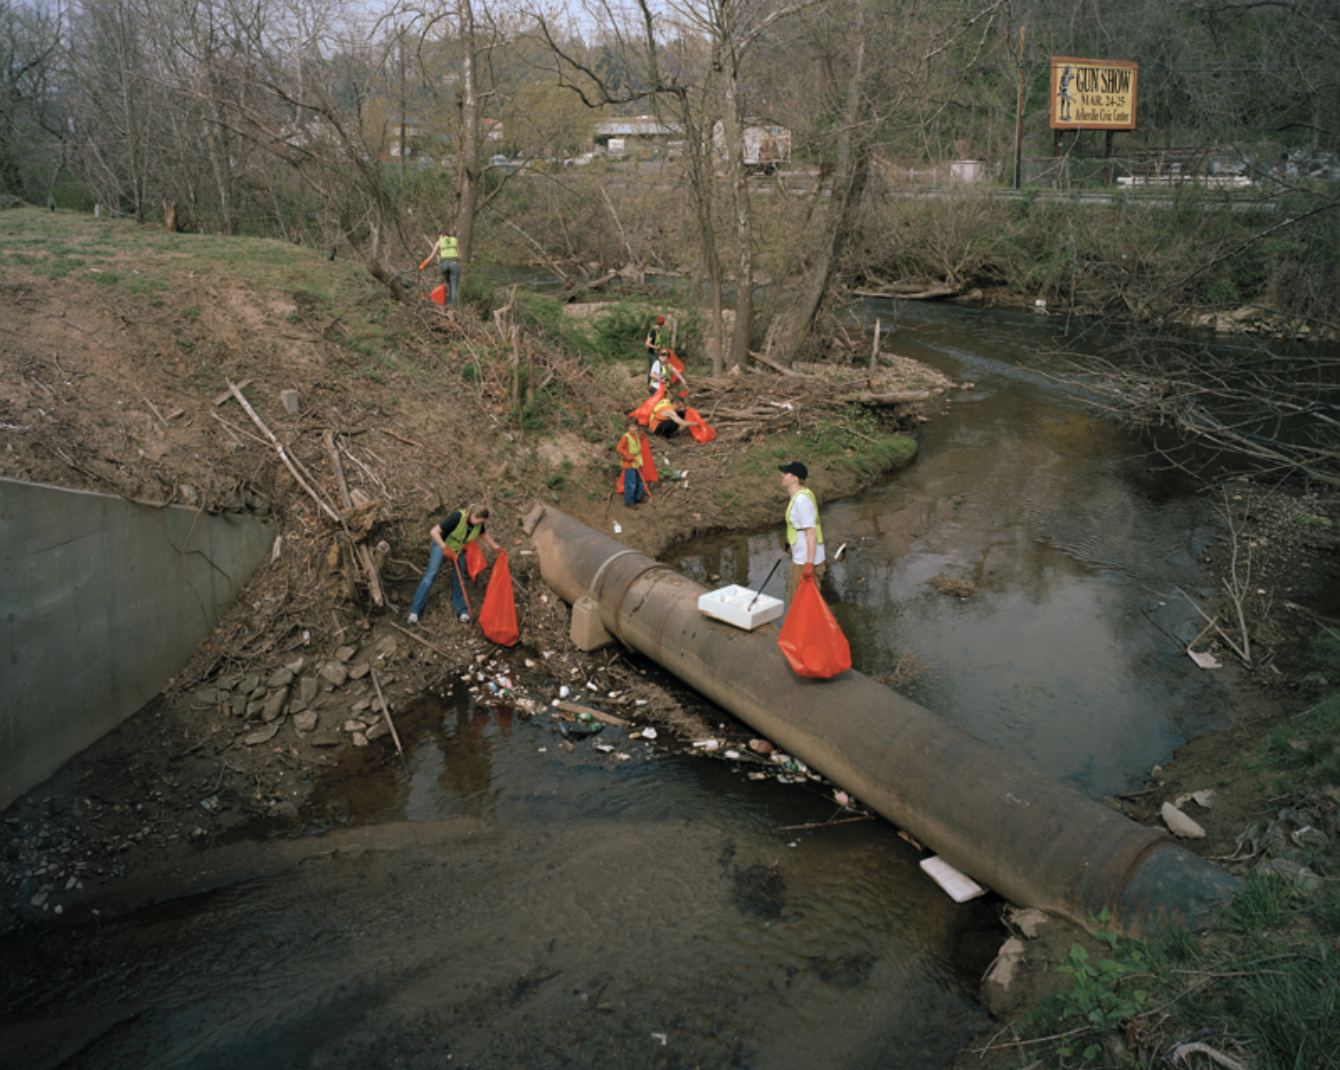   River Clean-up on the Swannanoa River, Asheville, North Carolina   Image: 2007/printed: 2020 Edition: 1/15 Archival Pigment Print 20 × 25 in. (image size) The Do Good Fund, Inc., 2020-007 